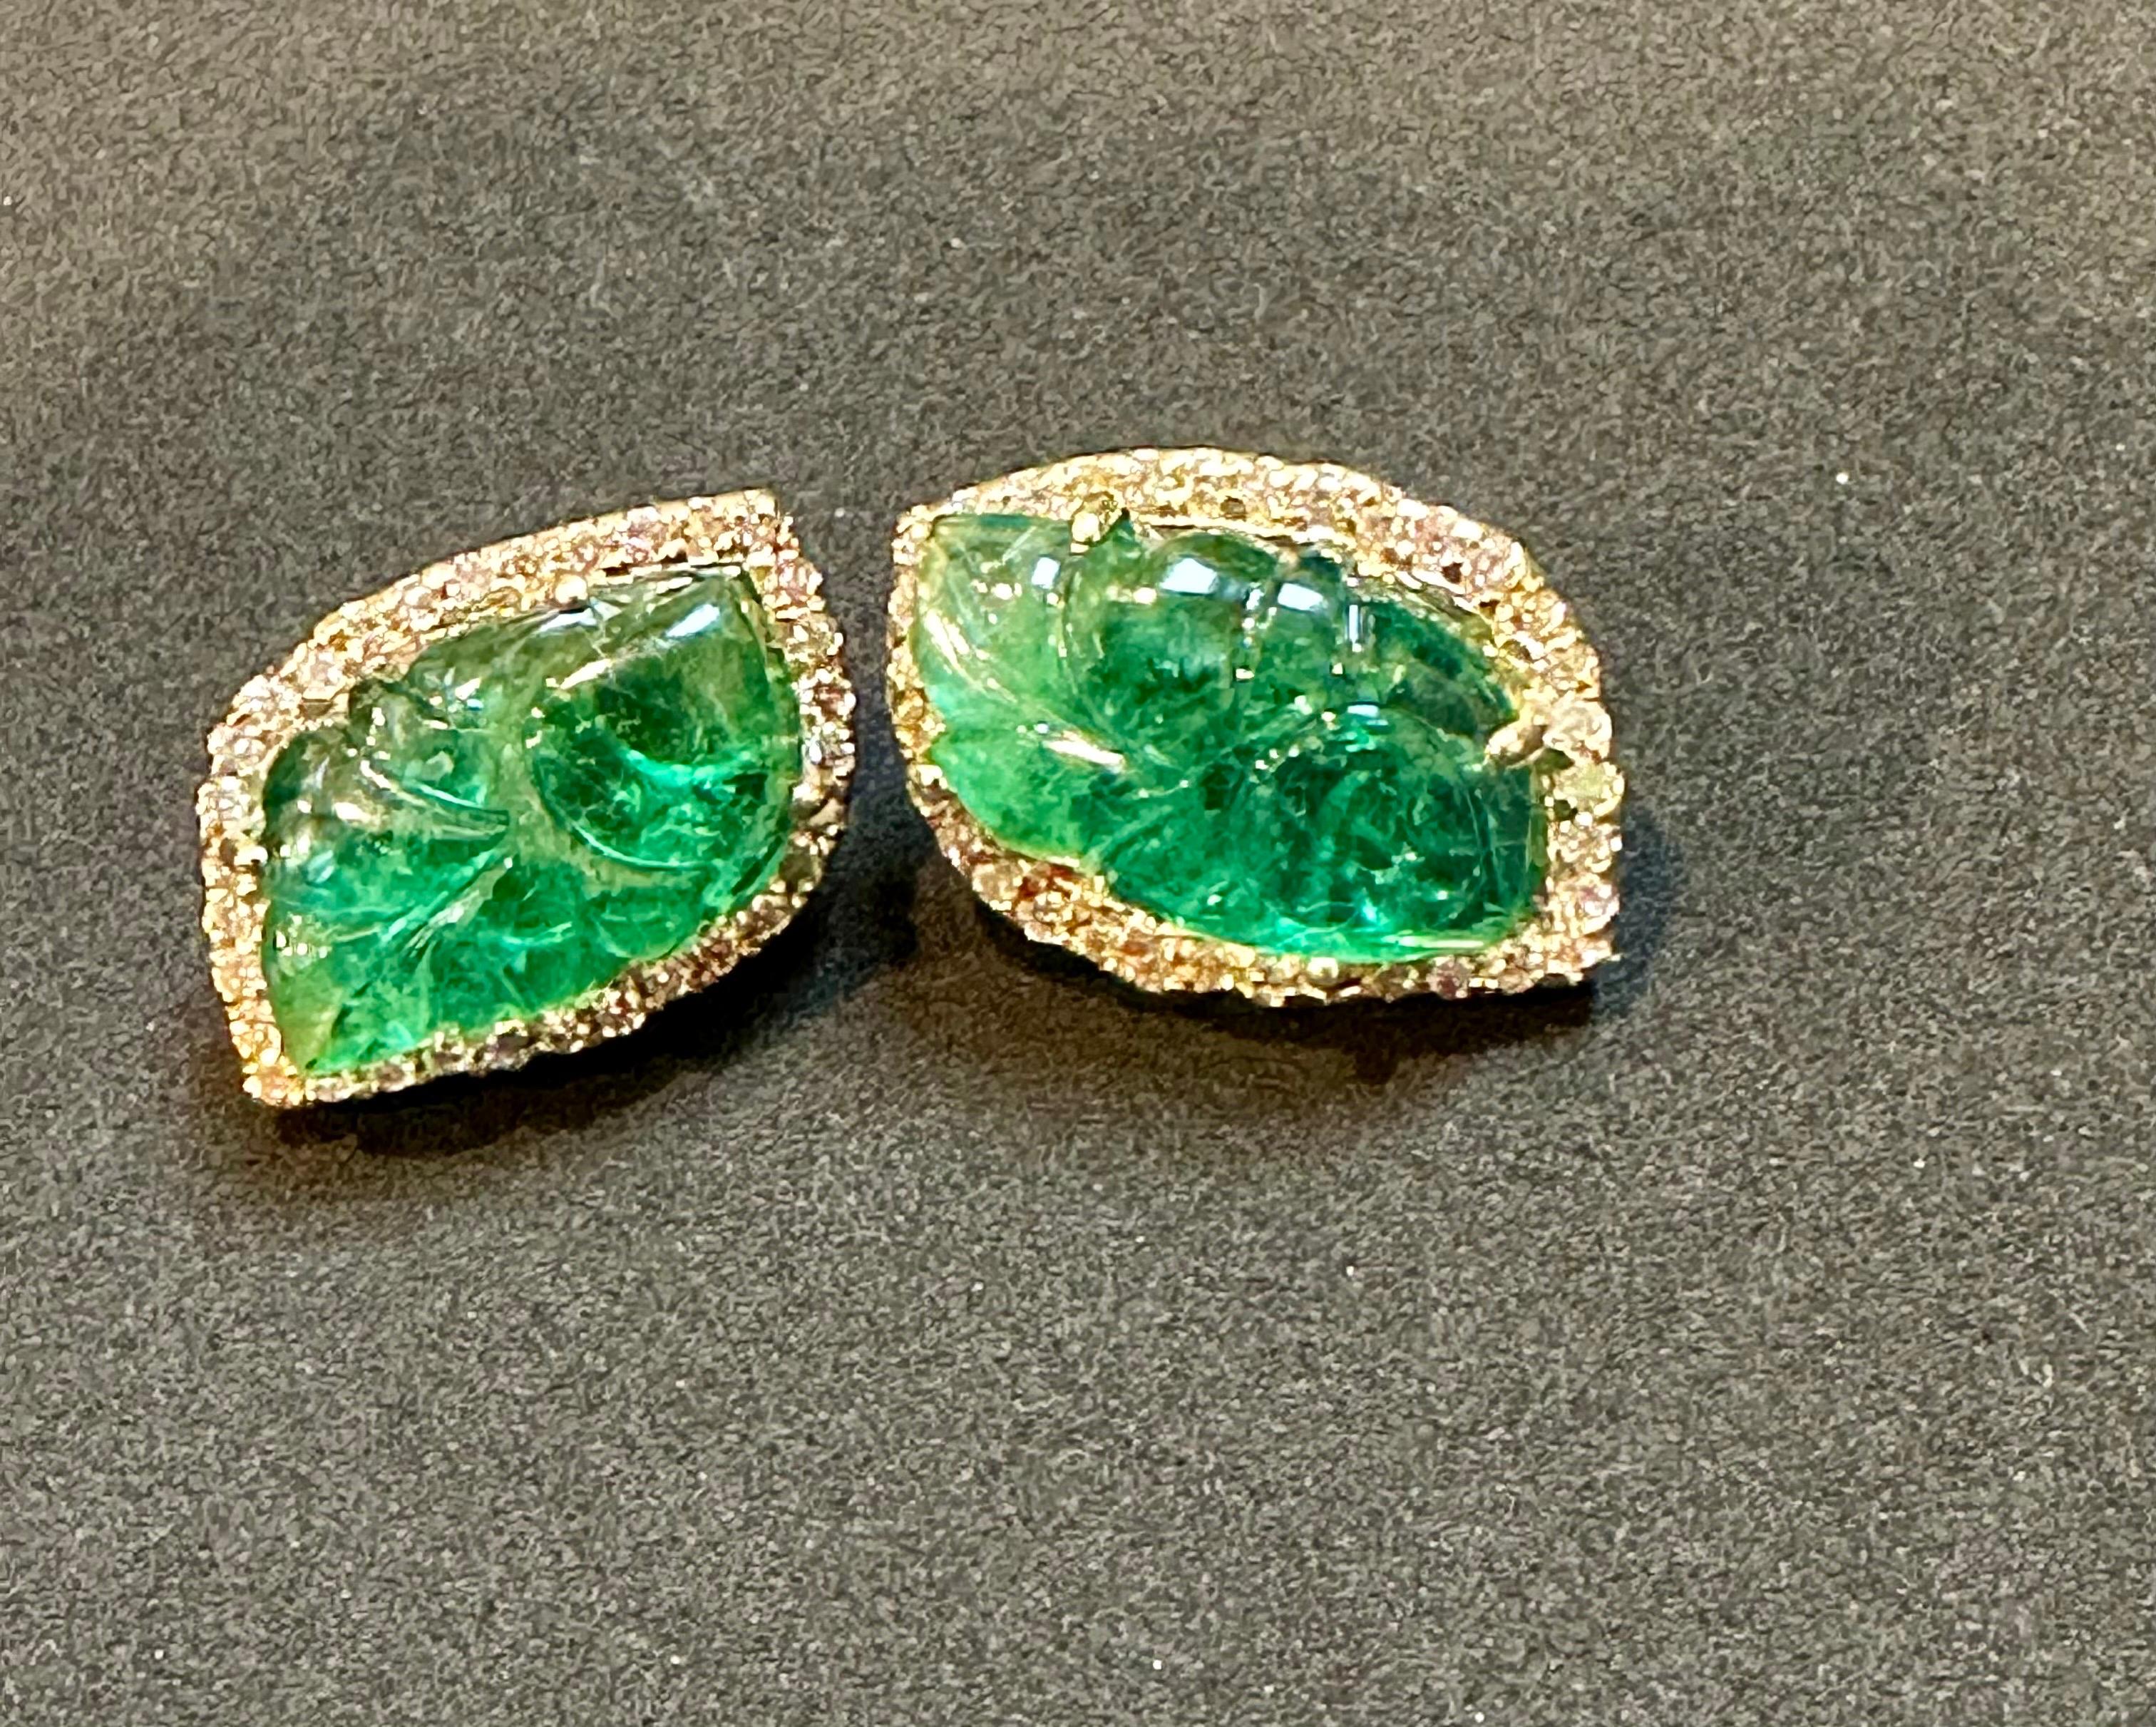 22 Ct Carved Emerald & 2 Ct Diamond Earrings 14 Karat Yellow Gold Post Earrings For Sale 5